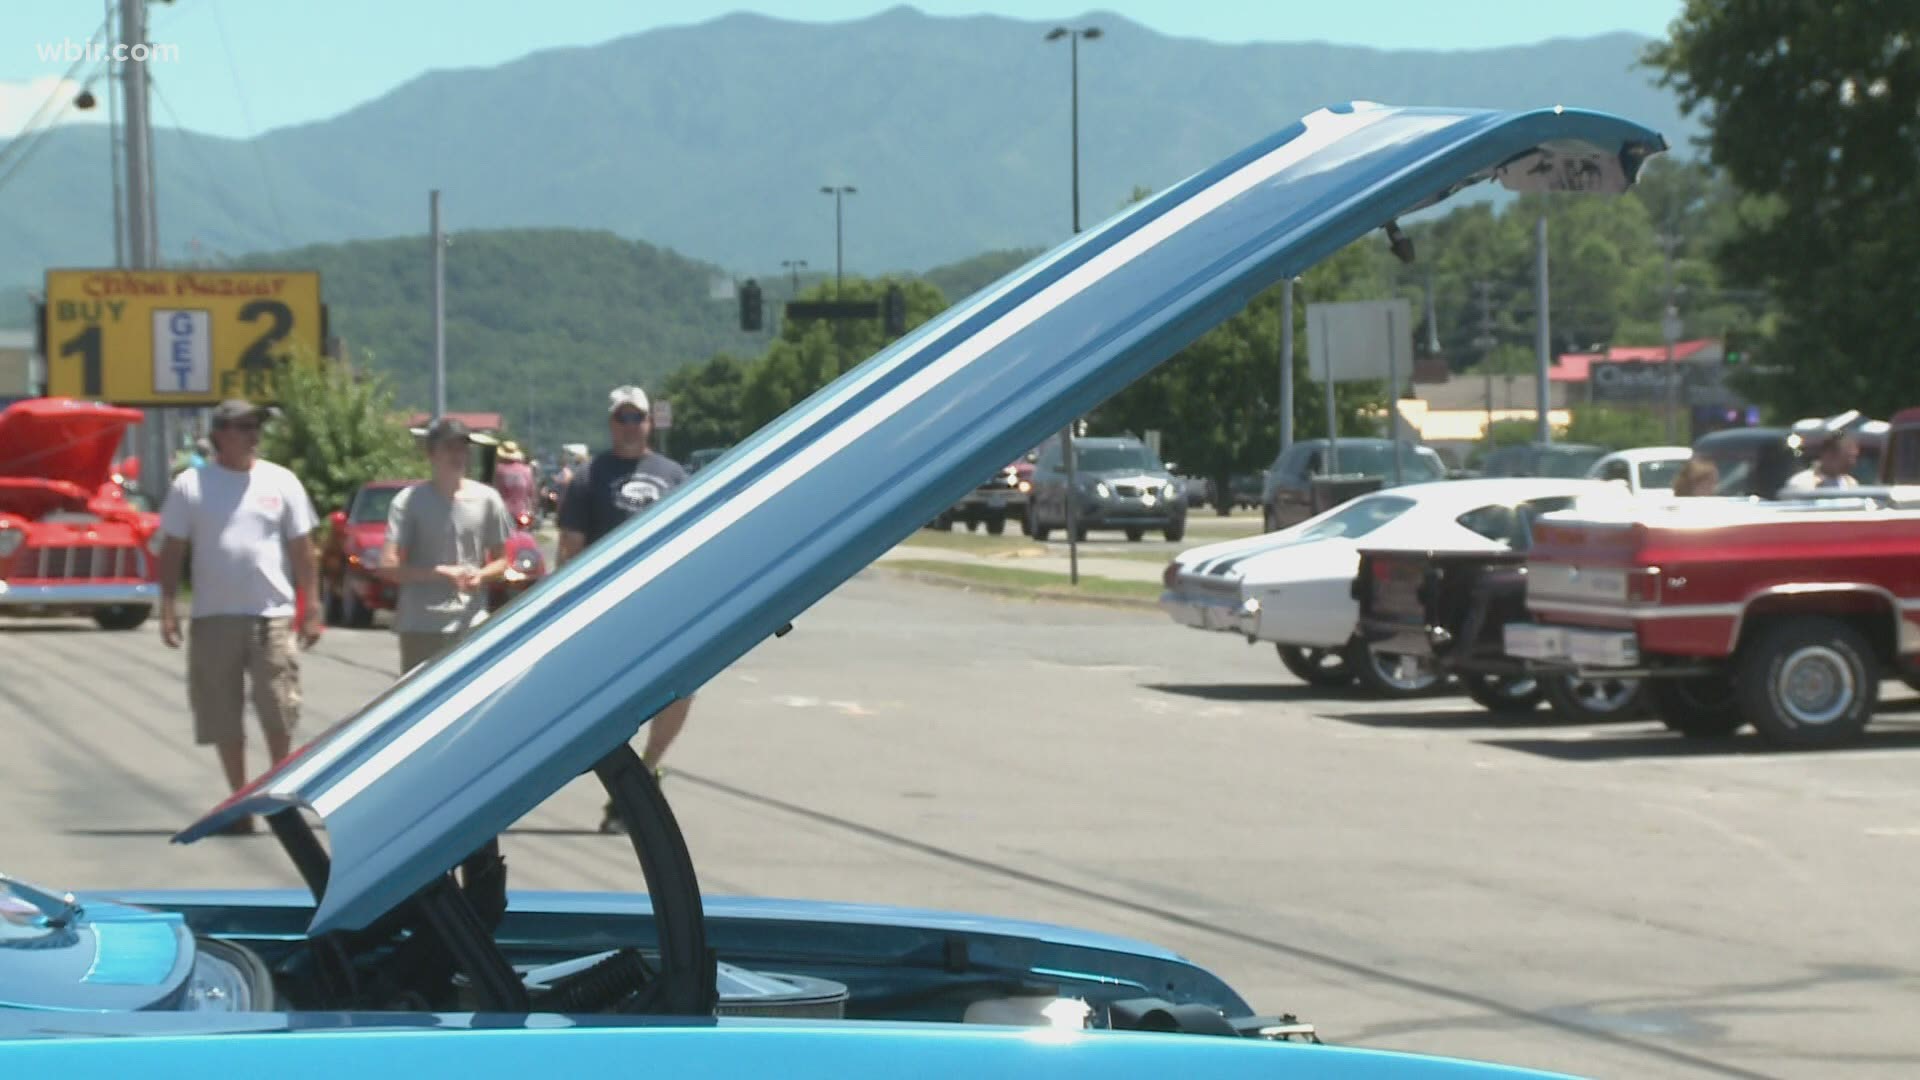 The annual spring rod run in Pigeon Forge was canceled due to COVID-19 concerns last month.